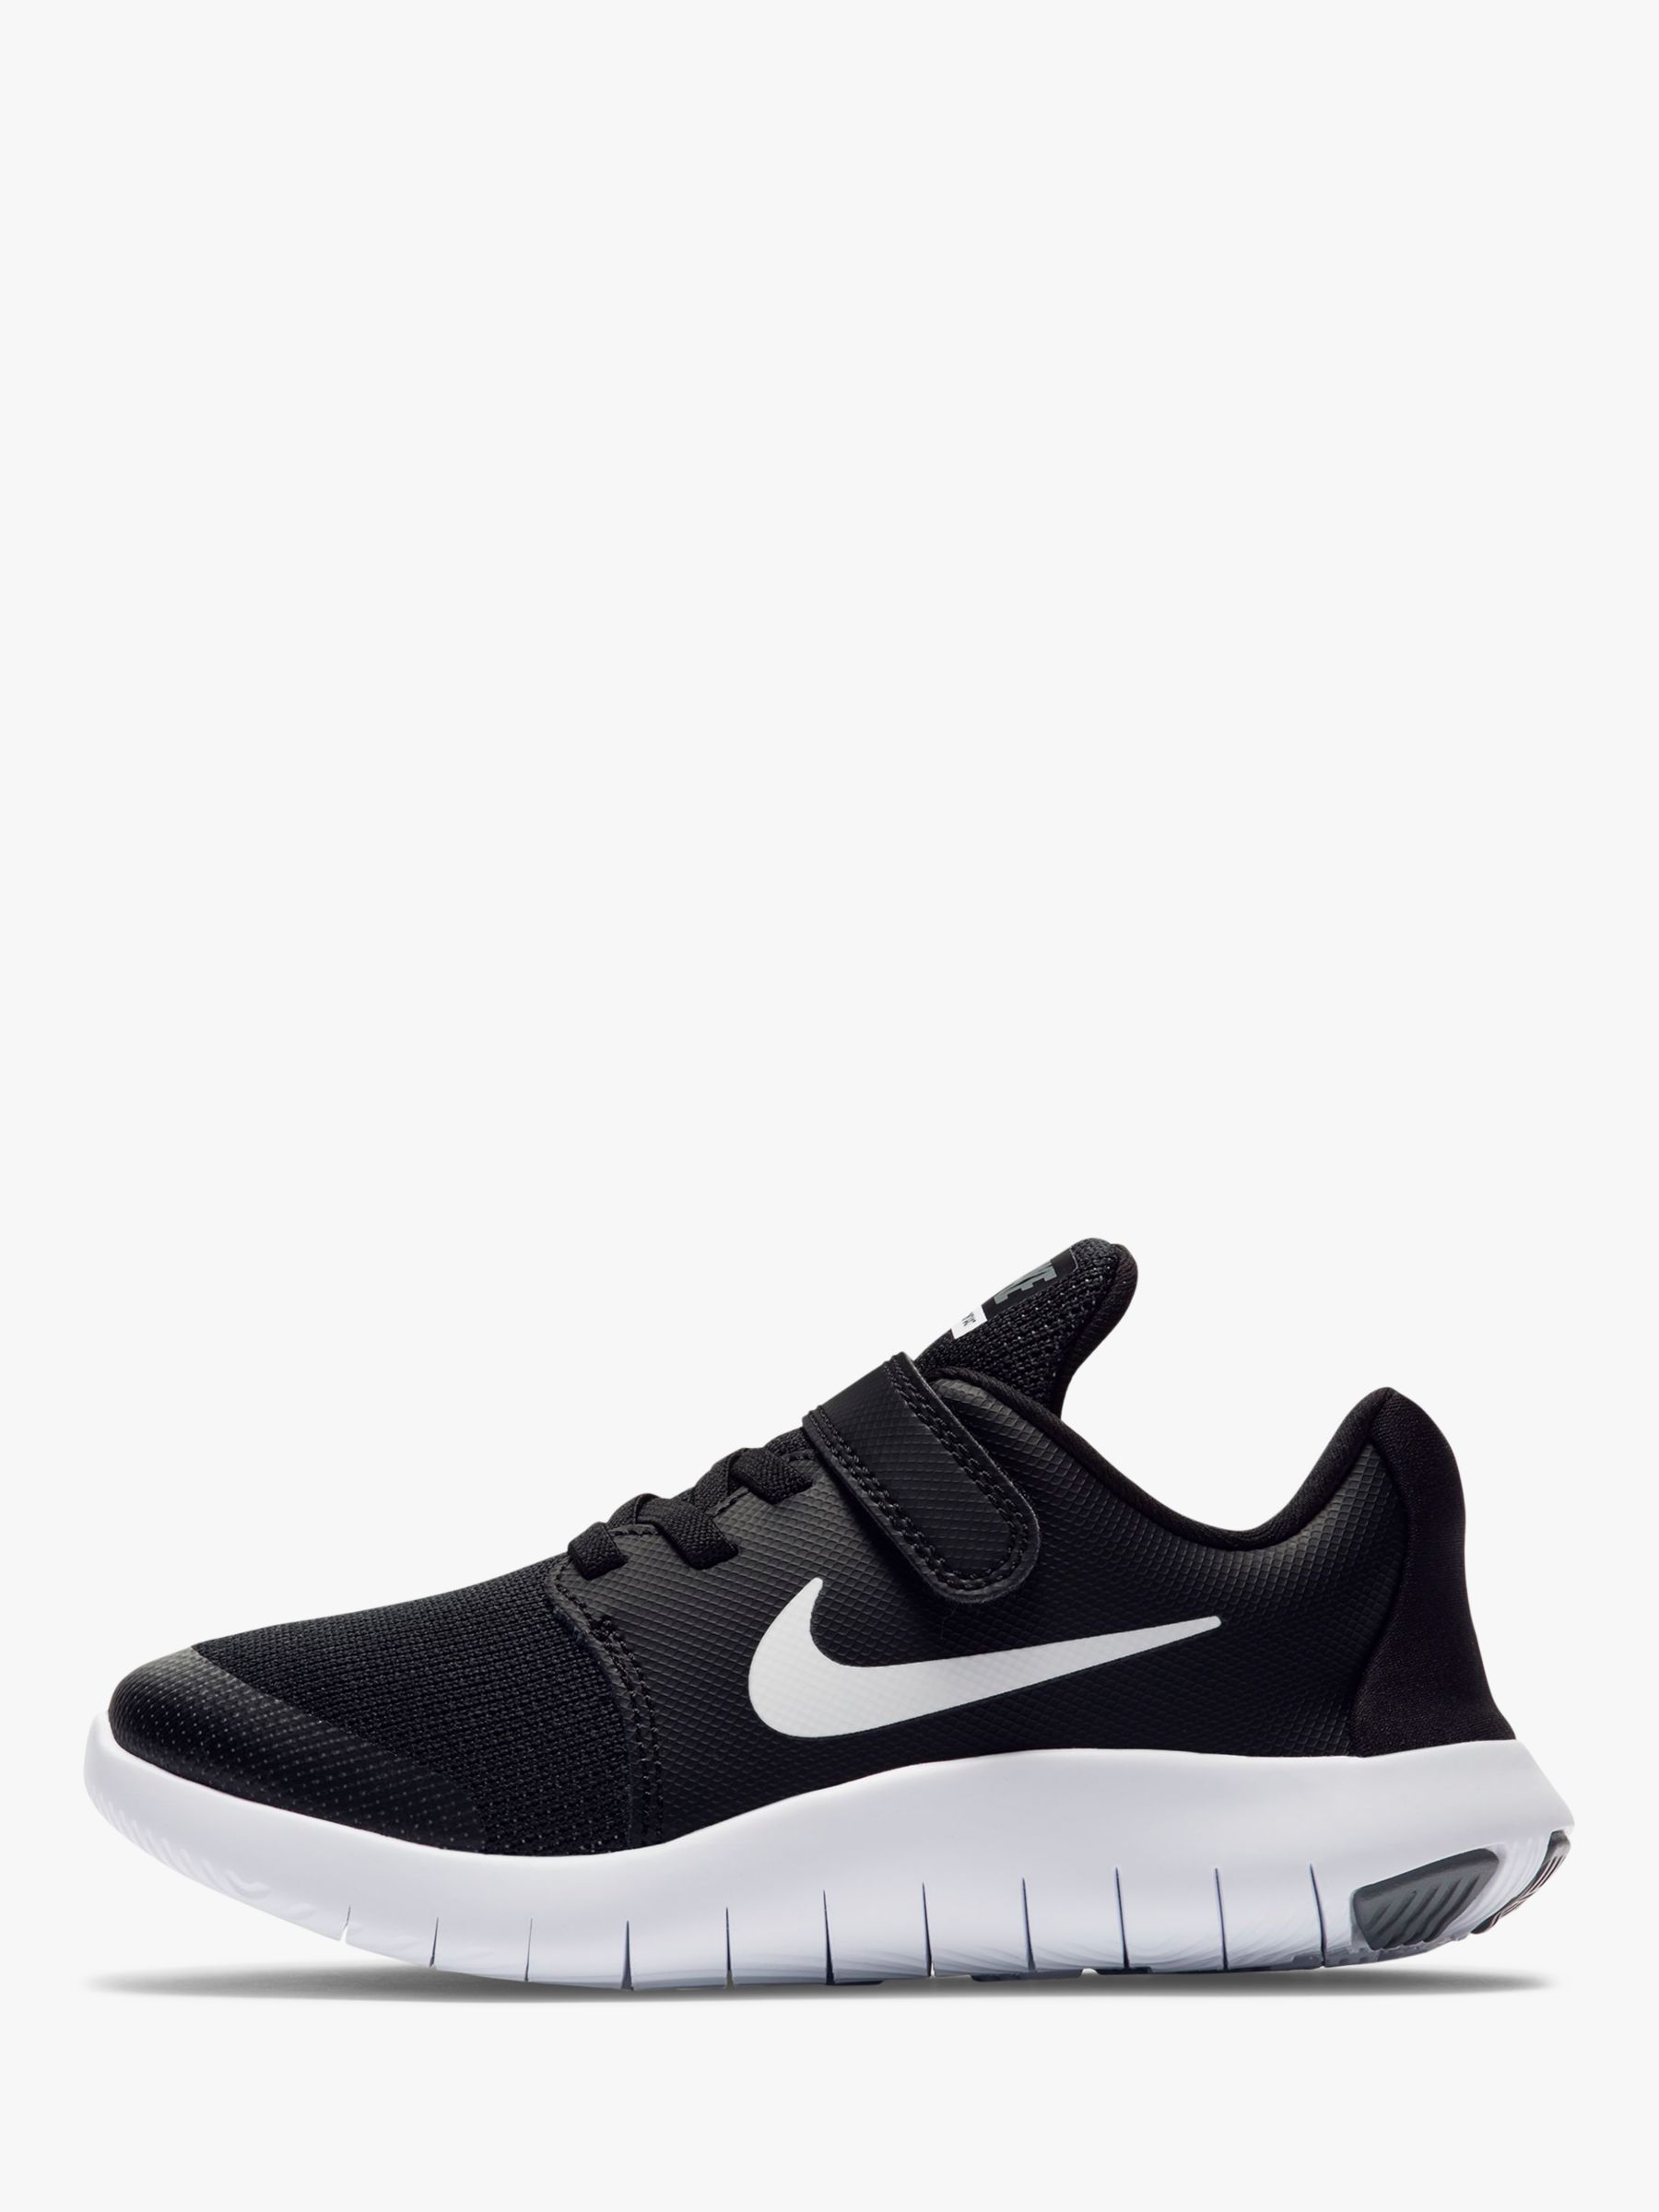 contact nike online